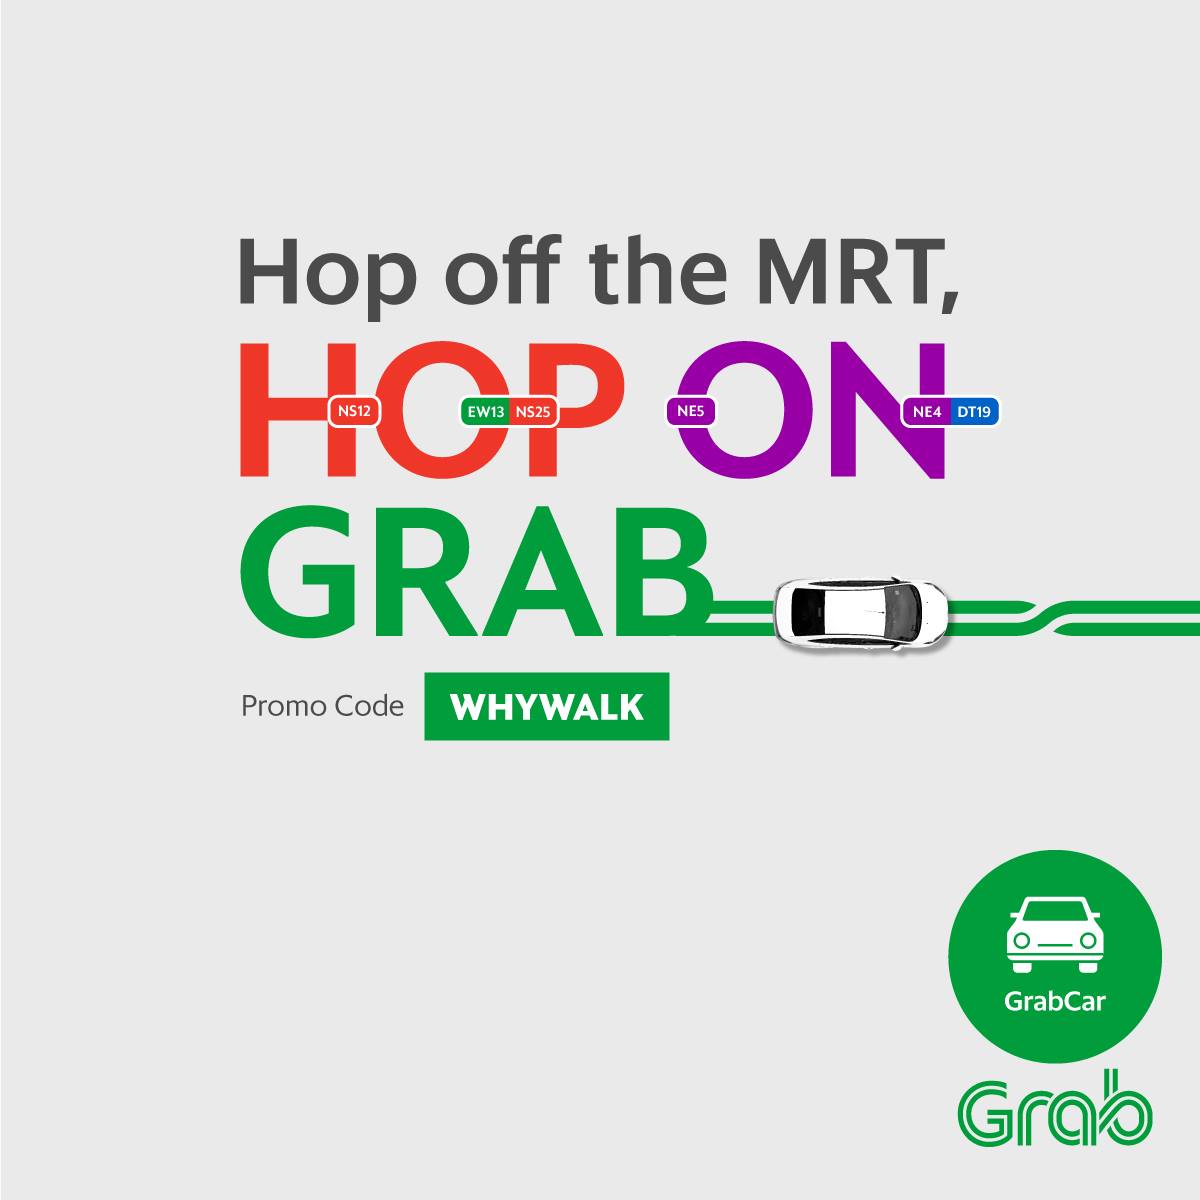 Grab Singapore $3 Off 5 GrabCar Rides to or from MRT Stations Promotion ends 2 Sep 2016